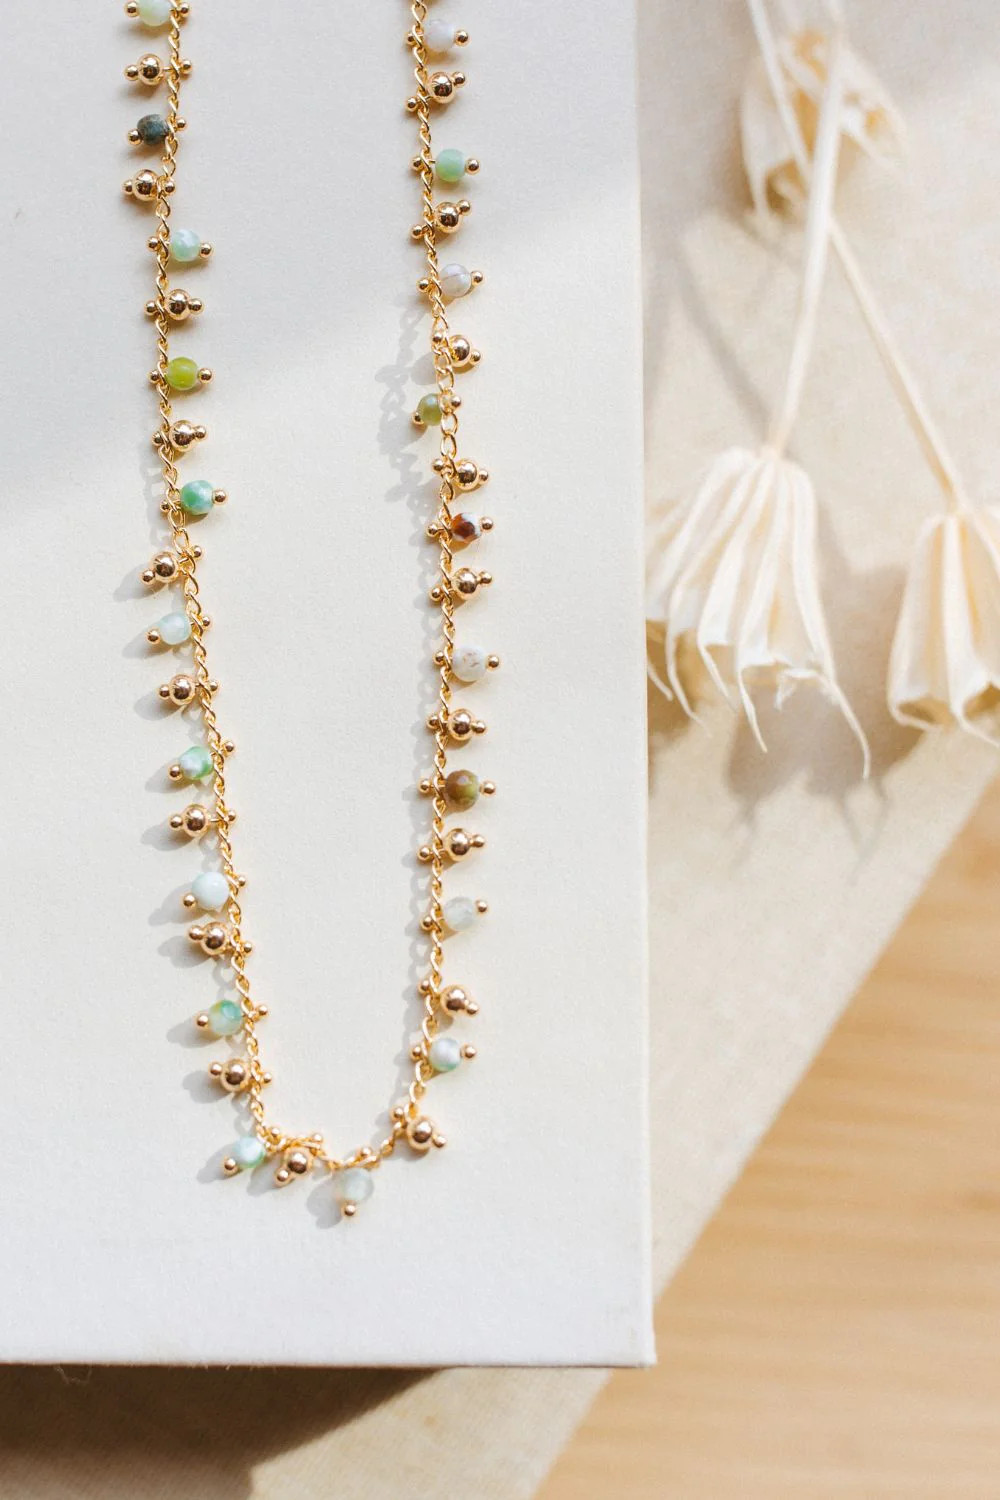 Gold/Green Beaded Necklace | Kristina Cole Designs